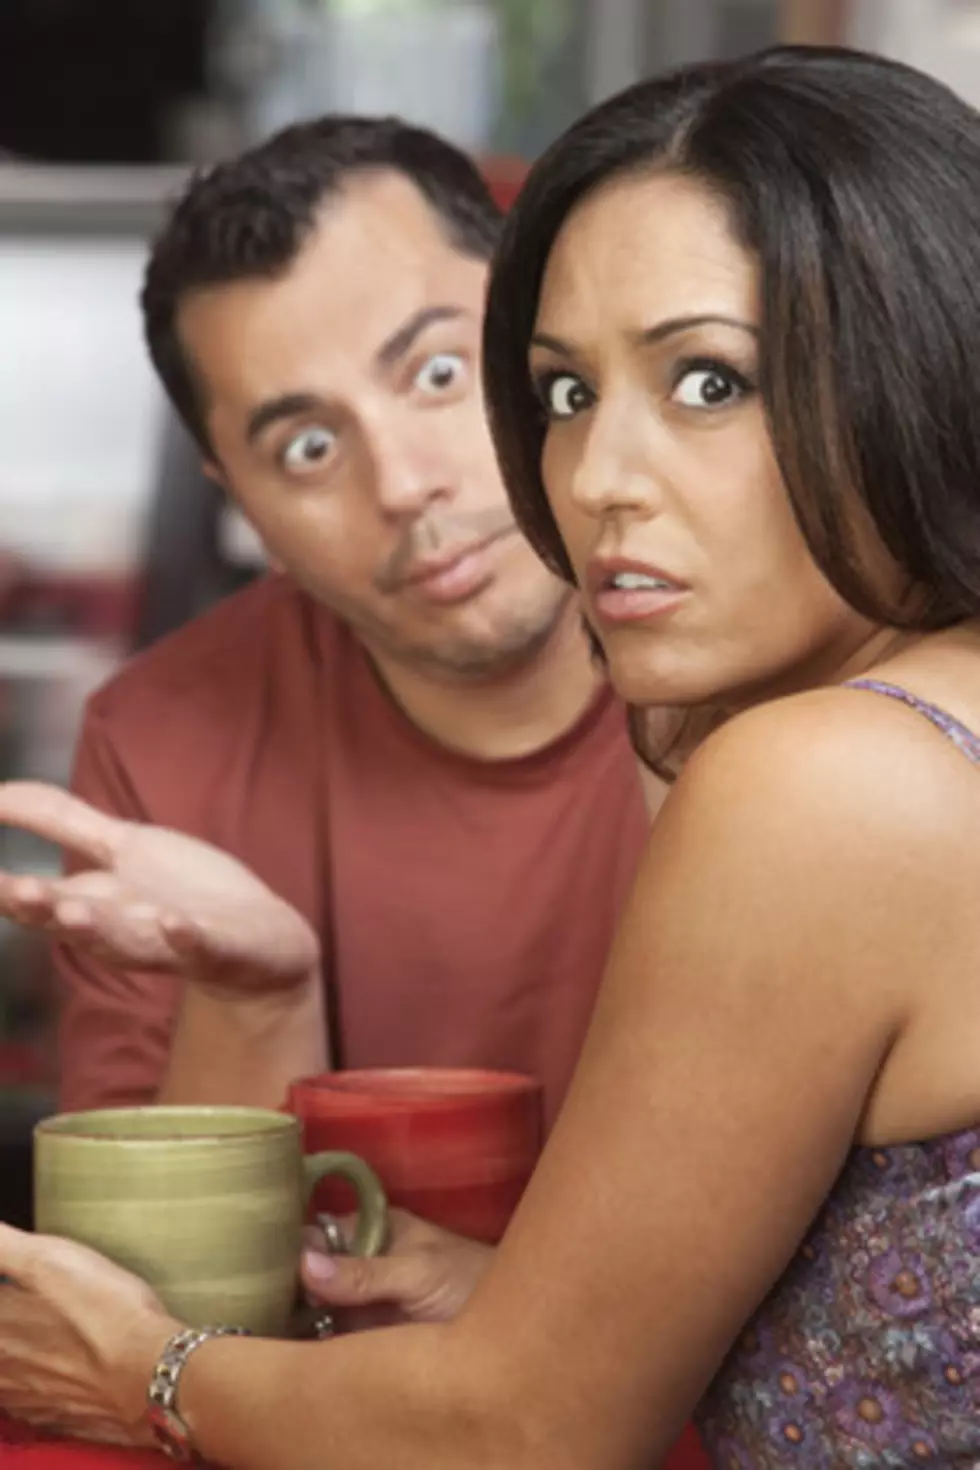 Some Things Men Wish Women Knew About Them